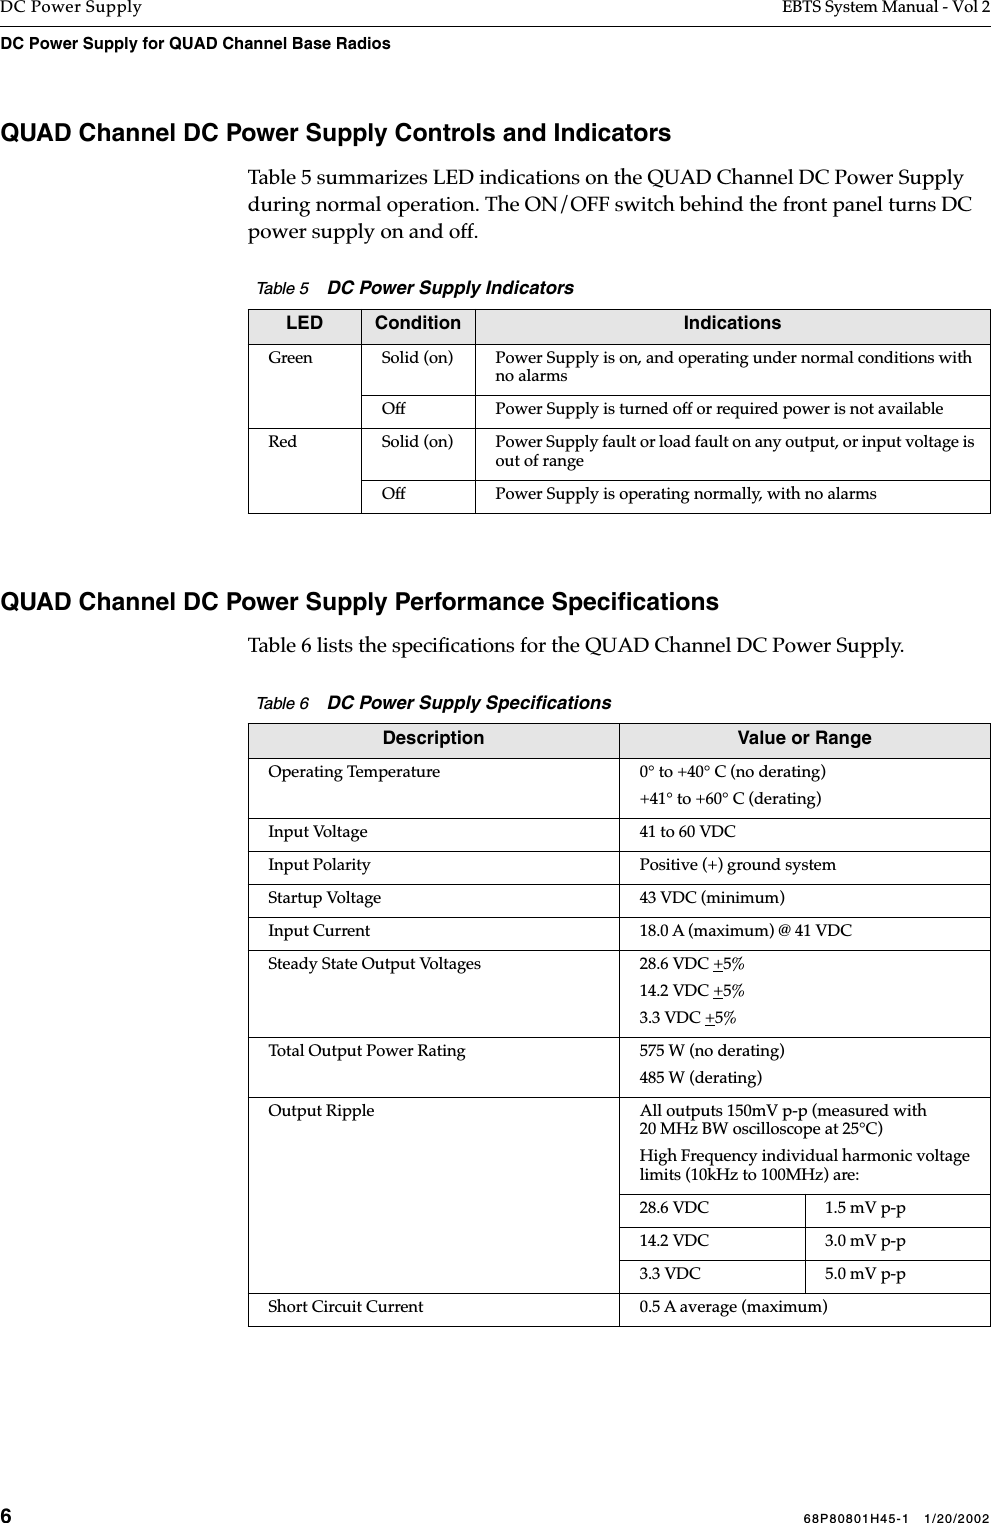 668P80801H45-1   1/20/2002DC Power Supply EBTS System Manual - Vol 2DC Power Supply for QUAD Channel Base Radios QUAD Channel DC Power Supply Controls and IndicatorsTable 5 summarizes LED indications on the QUAD Channel DC Power Supply during normal operation. The ON/OFF switch behind the front panel turns DC power supply on and off.QUAD Channel DC Power Supply Performance Speciﬁcations Table 6 lists the speciﬁcations for the QUAD Channel DC Power Supply.Table 5    DC Power Supply IndicatorsLED Condition IndicationsGreen Solid (on) Power Supply is on, and operating under normal conditions with no alarmsOff Power Supply is turned off or required power is not availableRed Solid (on) Power Supply fault or load fault on any output, or input voltage is out of rangeOff Power Supply is operating normally, with no alarmsTable 6    DC Power Supply Speciﬁcations  Description Value or RangeOperating Temperature 0° to +40° C (no derating)+41° to +60° C (derating)Input Voltage 41 to 60 VDCInput Polarity Positive (+) ground systemStartup Voltage 43 VDC (minimum)Input Current 18.0 A (maximum) @ 41 VDCSteady State Output Voltages 28.6 VDC +5%14.2 VDC +5%3.3 VDC +5%Total Output Power Rating 575 W (no derating)485 W (derating)Output Ripple All outputs 150mV p-p (measured with 20 MHz BW oscilloscope at 25°C)High Frequency individual harmonic voltage limits (10kHz to 100MHz) are:28.6 VDC 1.5 mV p-p14.2 VDC  3.0 mV p-p3.3 VDC 5.0 mV p-pShort Circuit Current 0.5 A average (maximum)